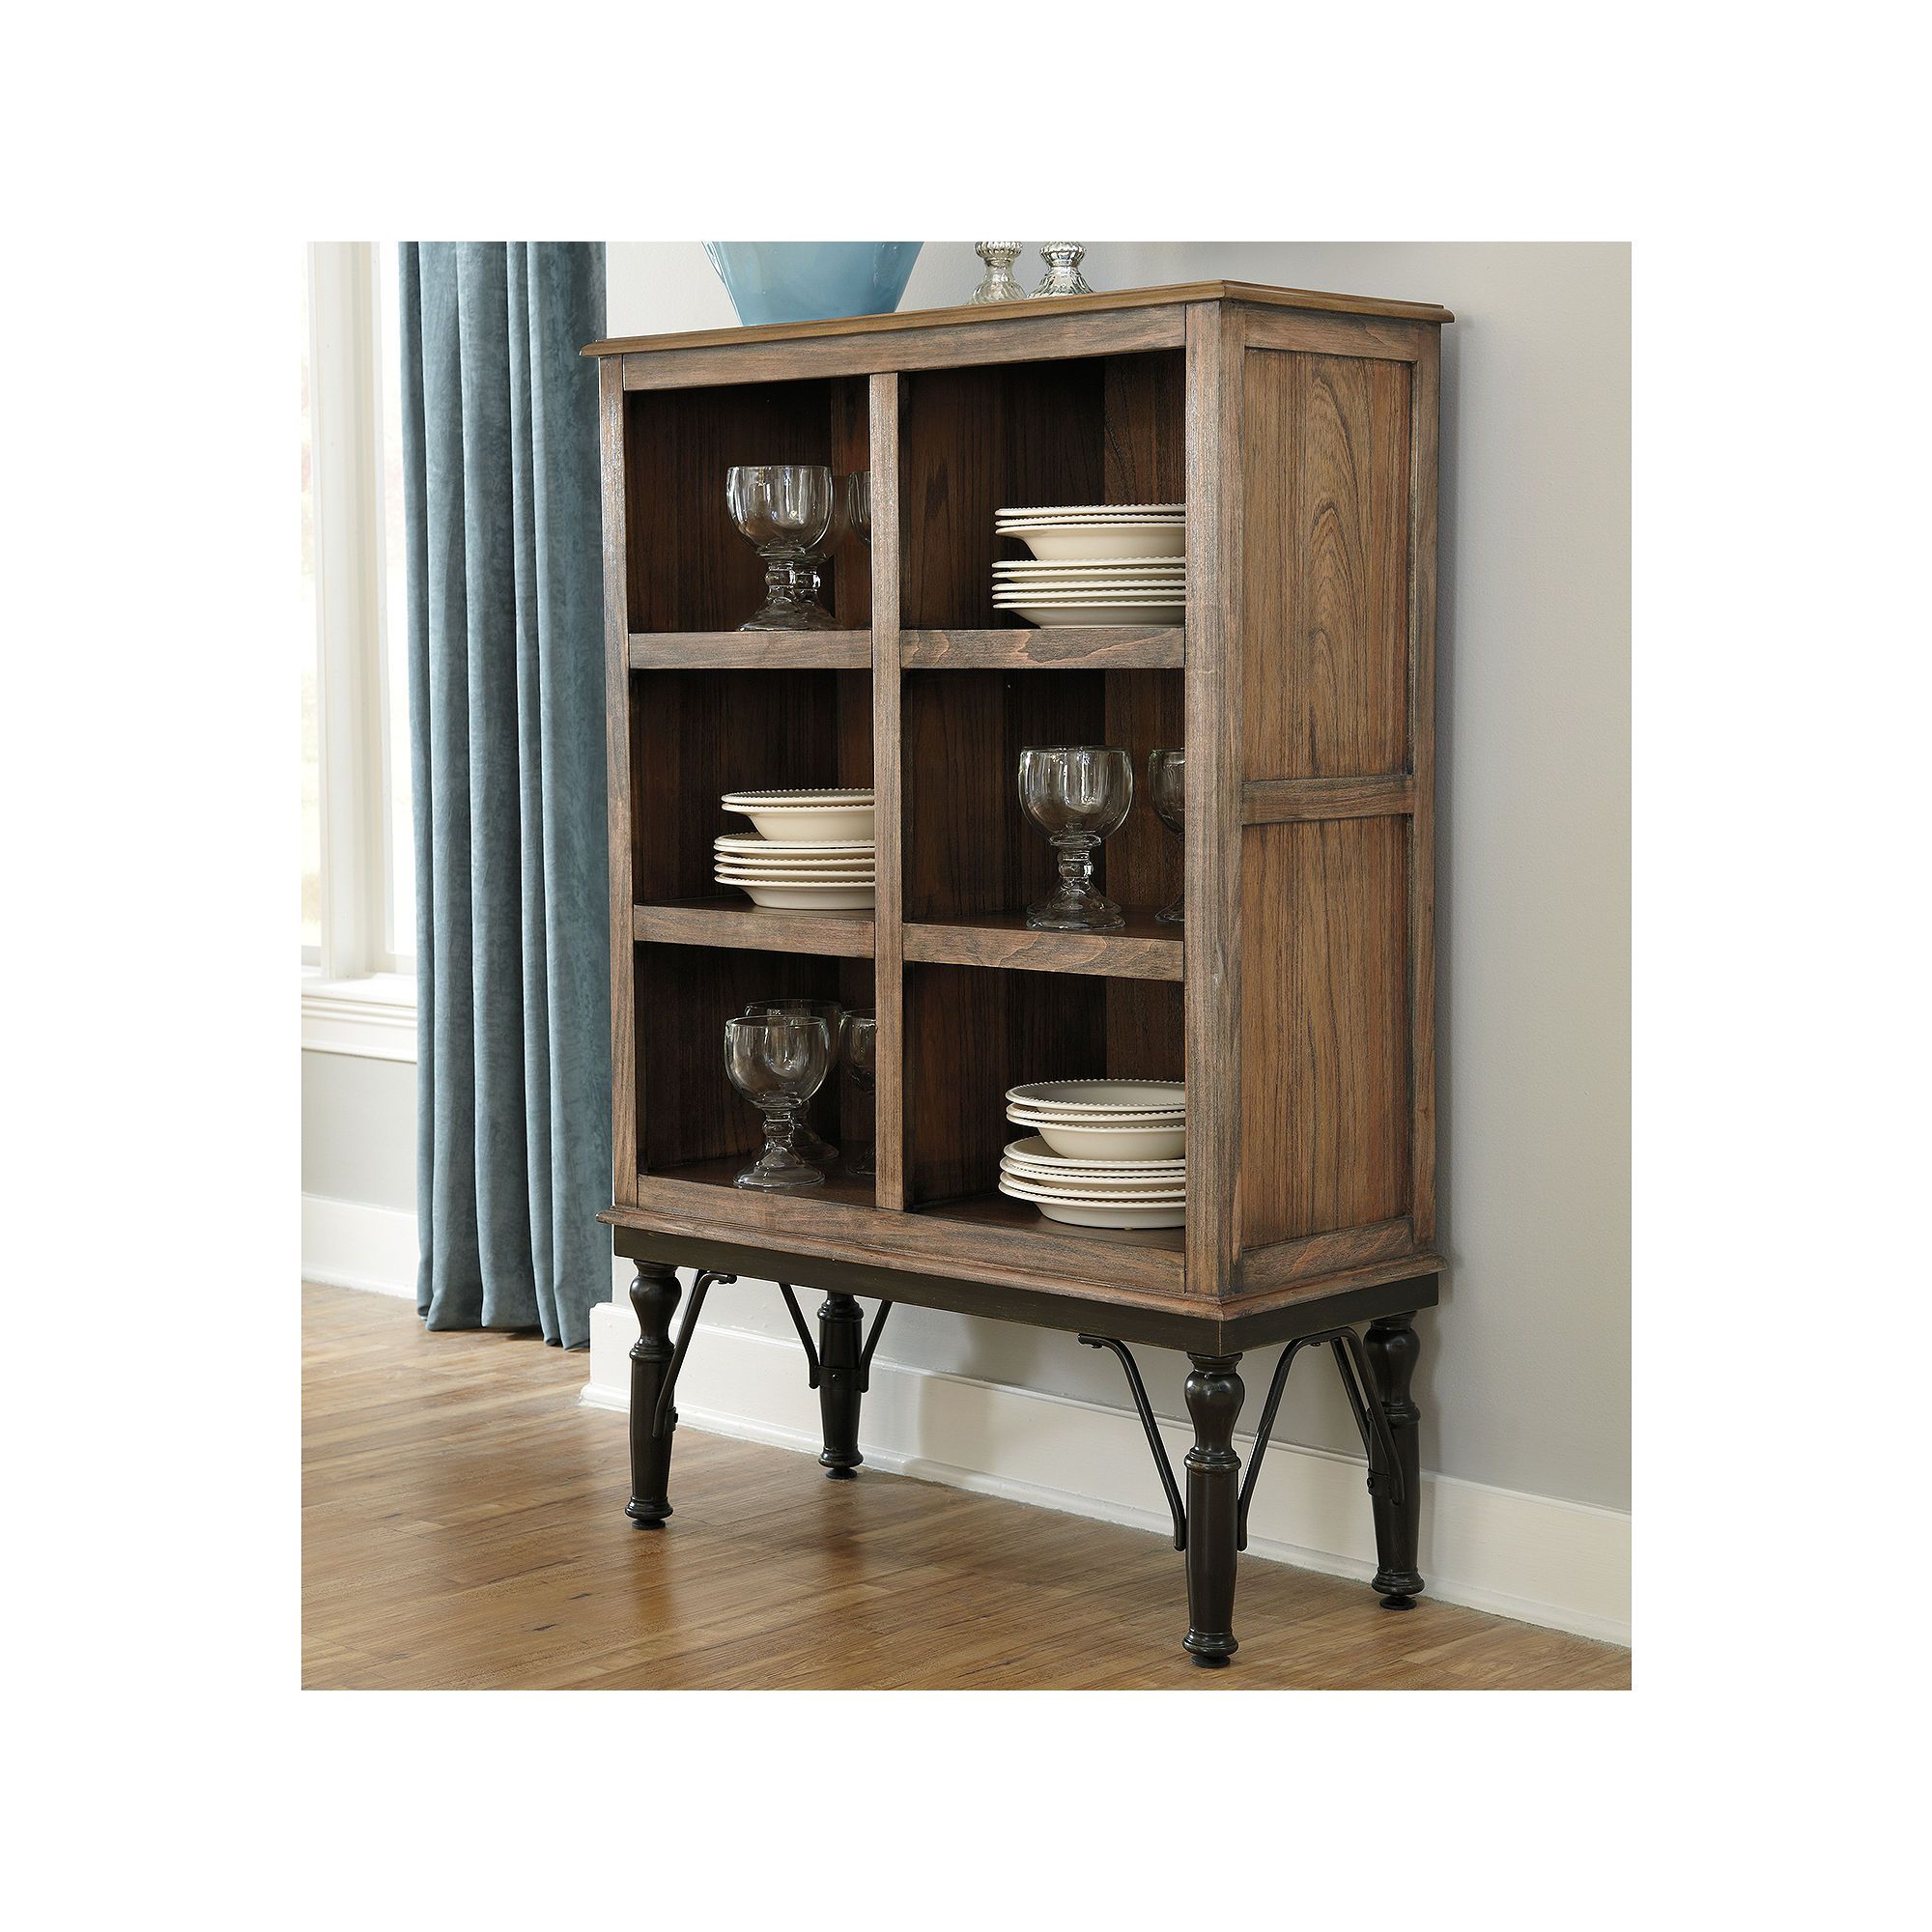 Signature Design by Ashley Tripton Dining Room Server | JCPenney